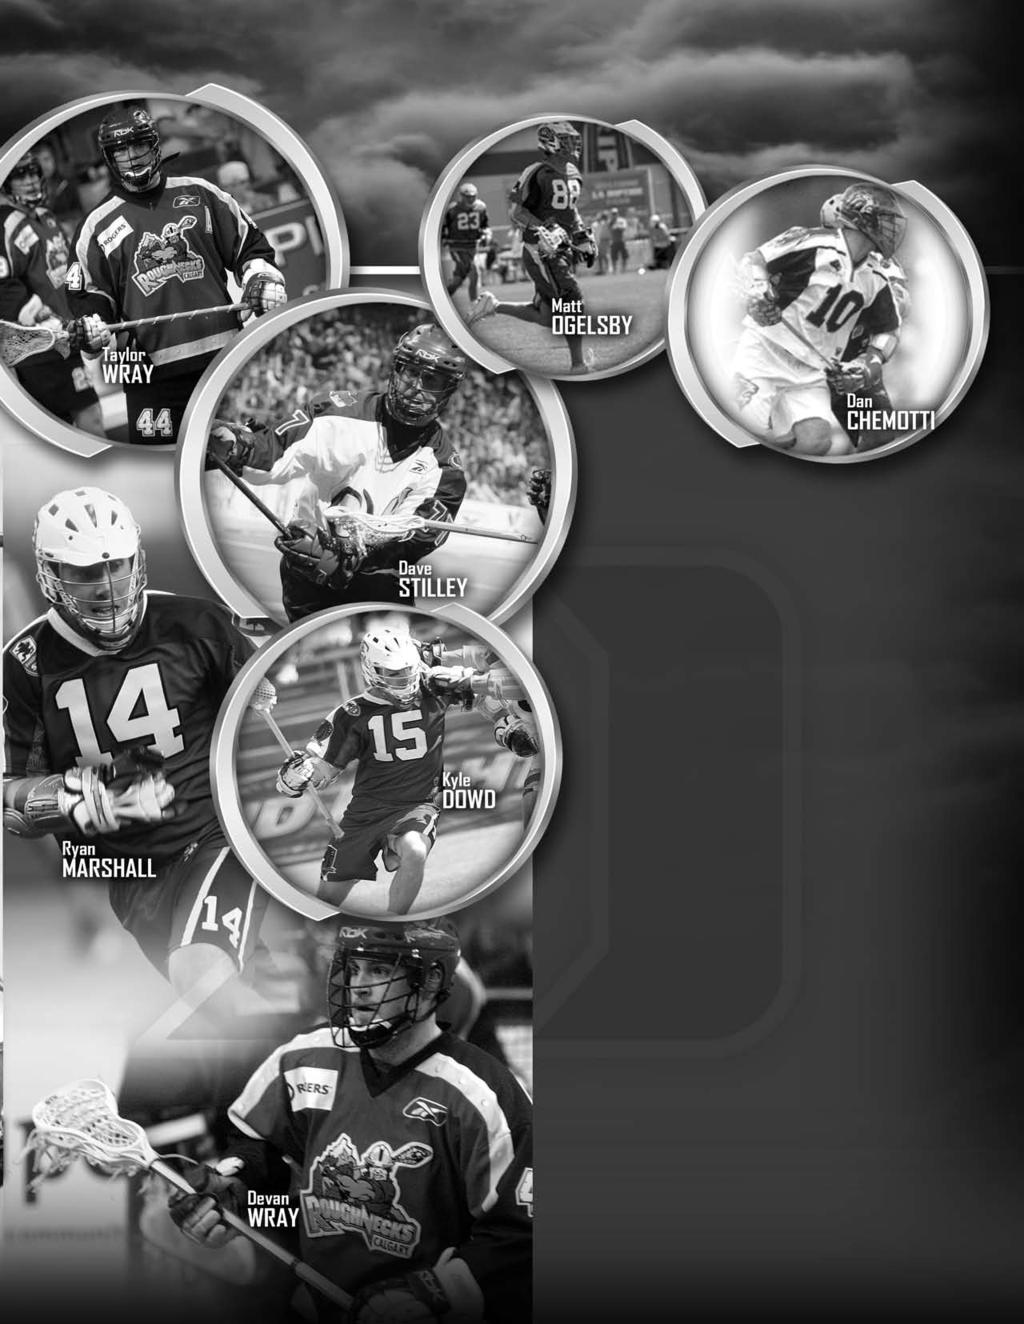 Former Duke players have enjoyed their share of success on the professional levels of lacrosse. In 2009, two Duke players were picked in the Major League Lacrosse Draft.